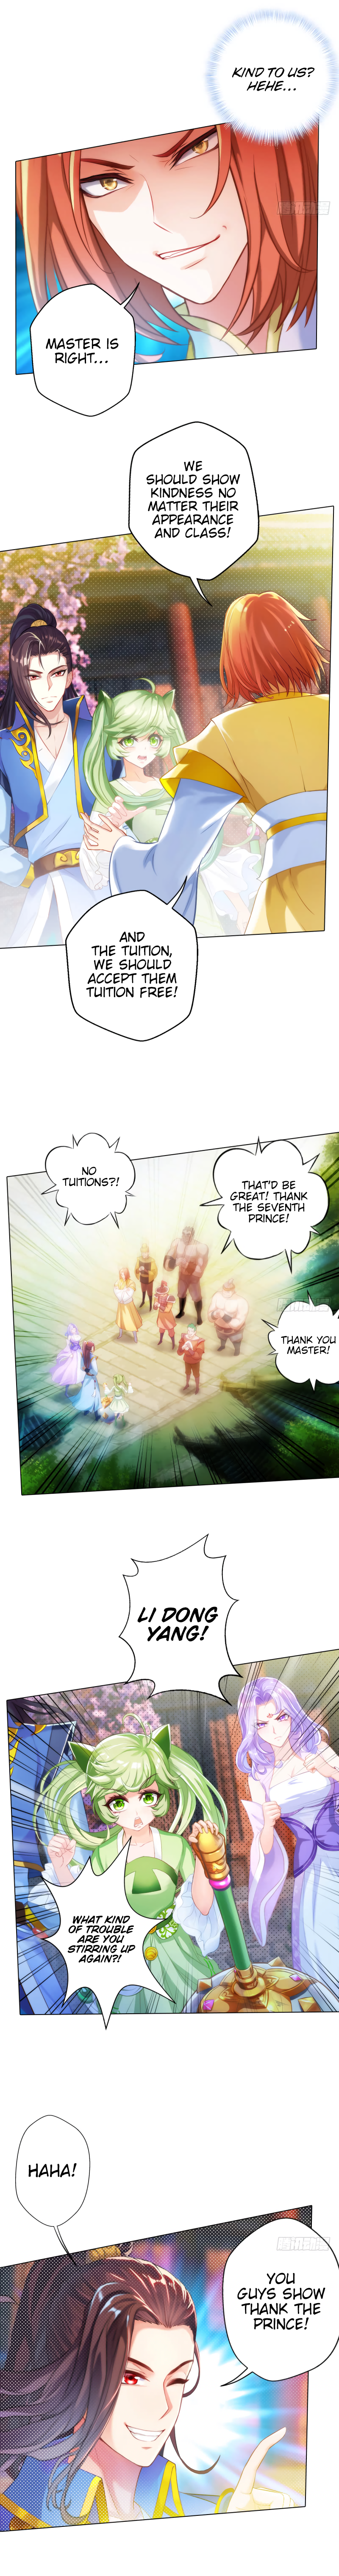 Lang Huan Library Chapter 18 page 9